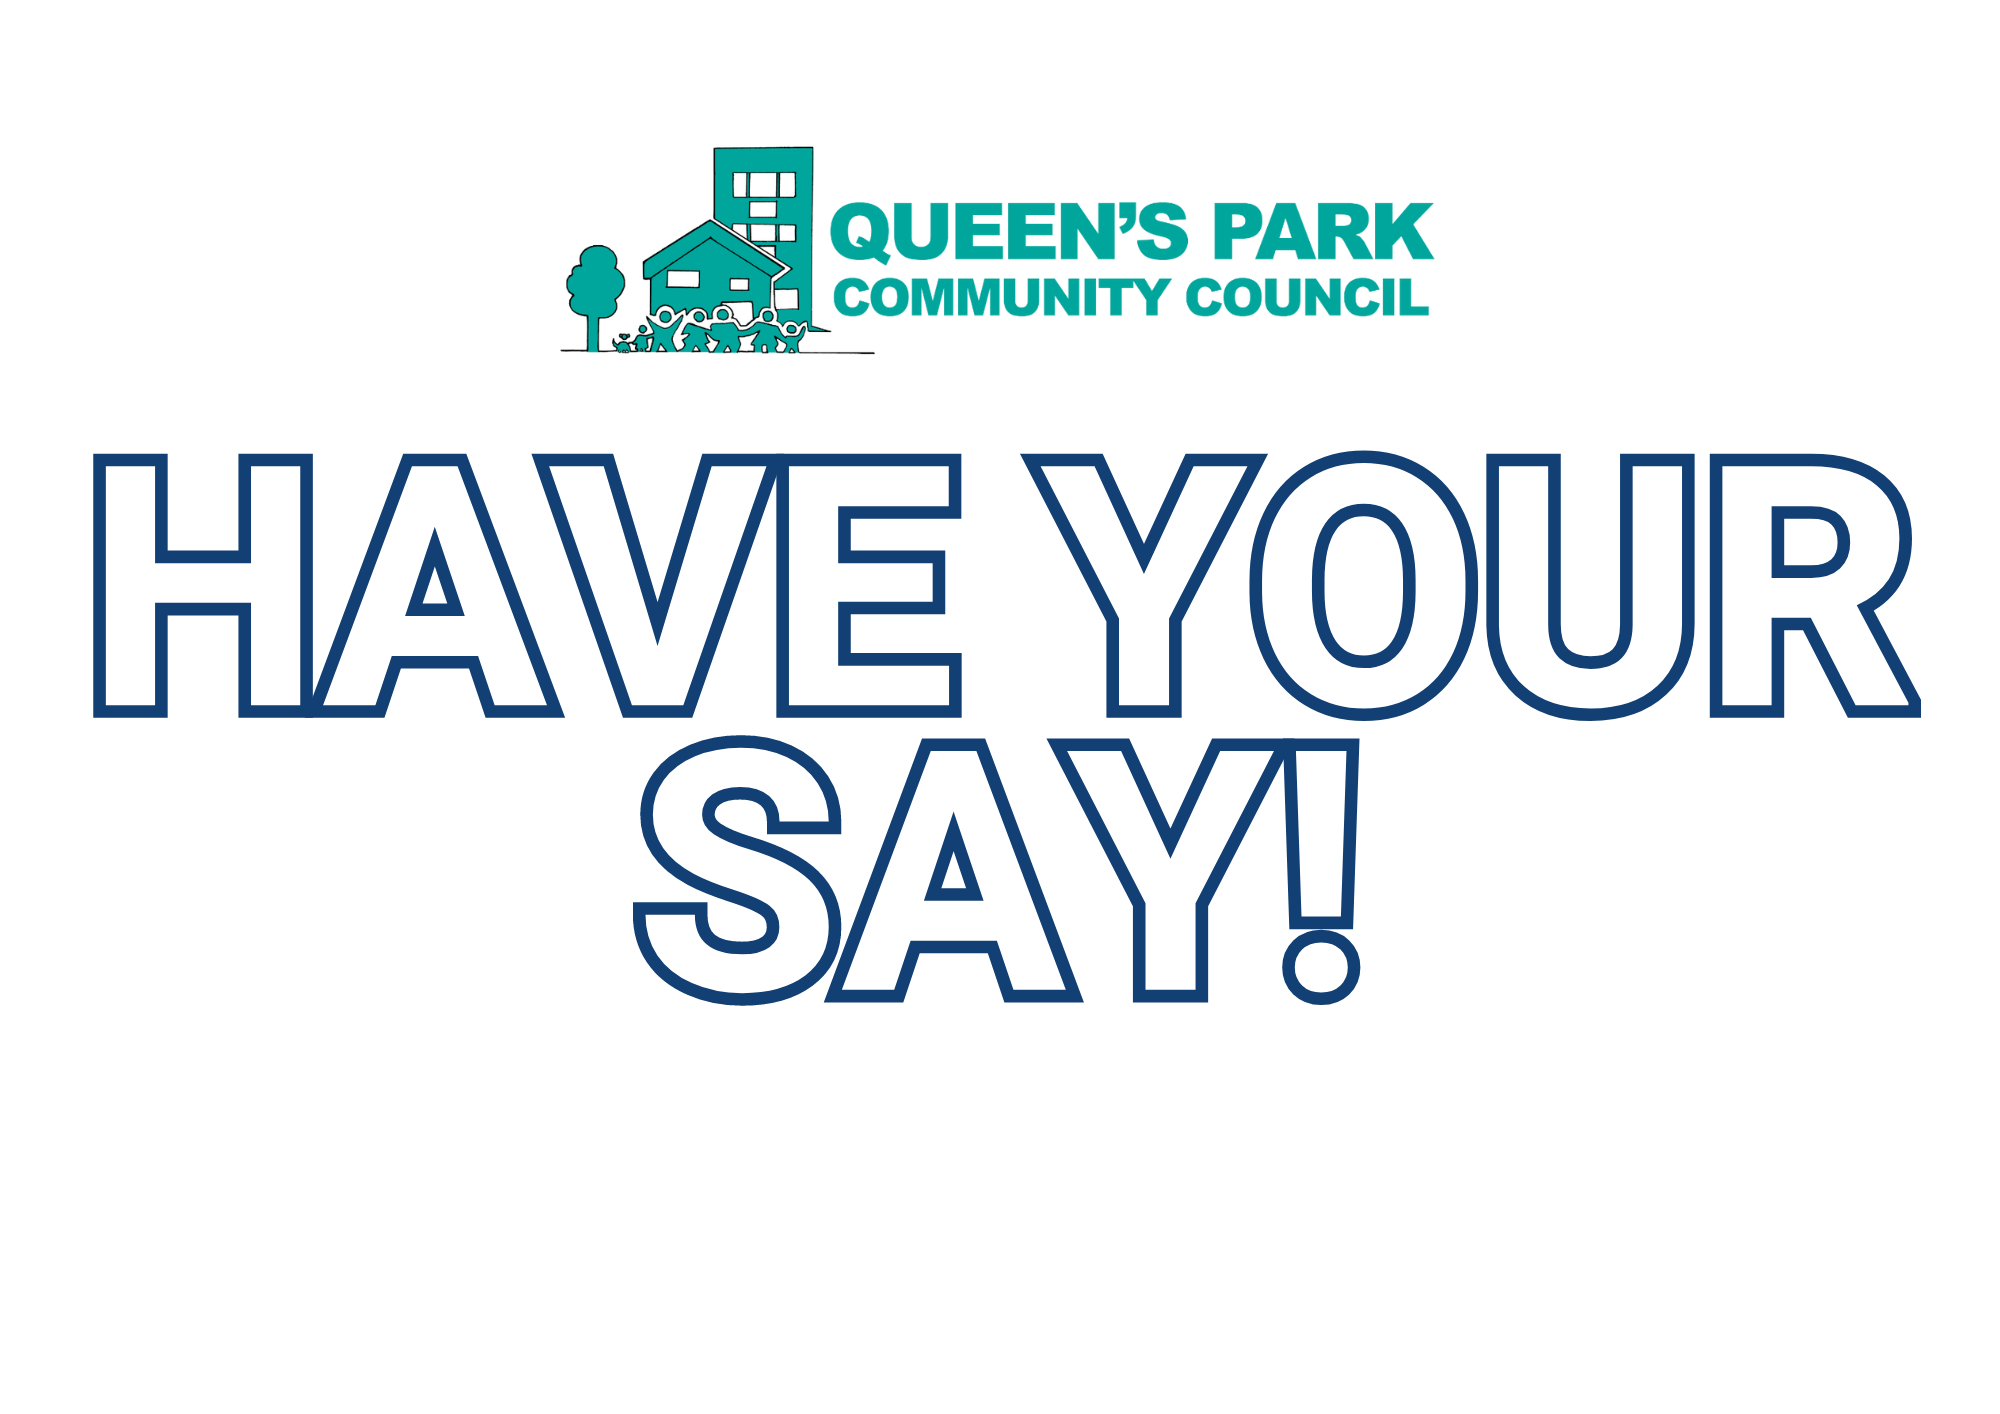 Have your say on the proposed precept increase